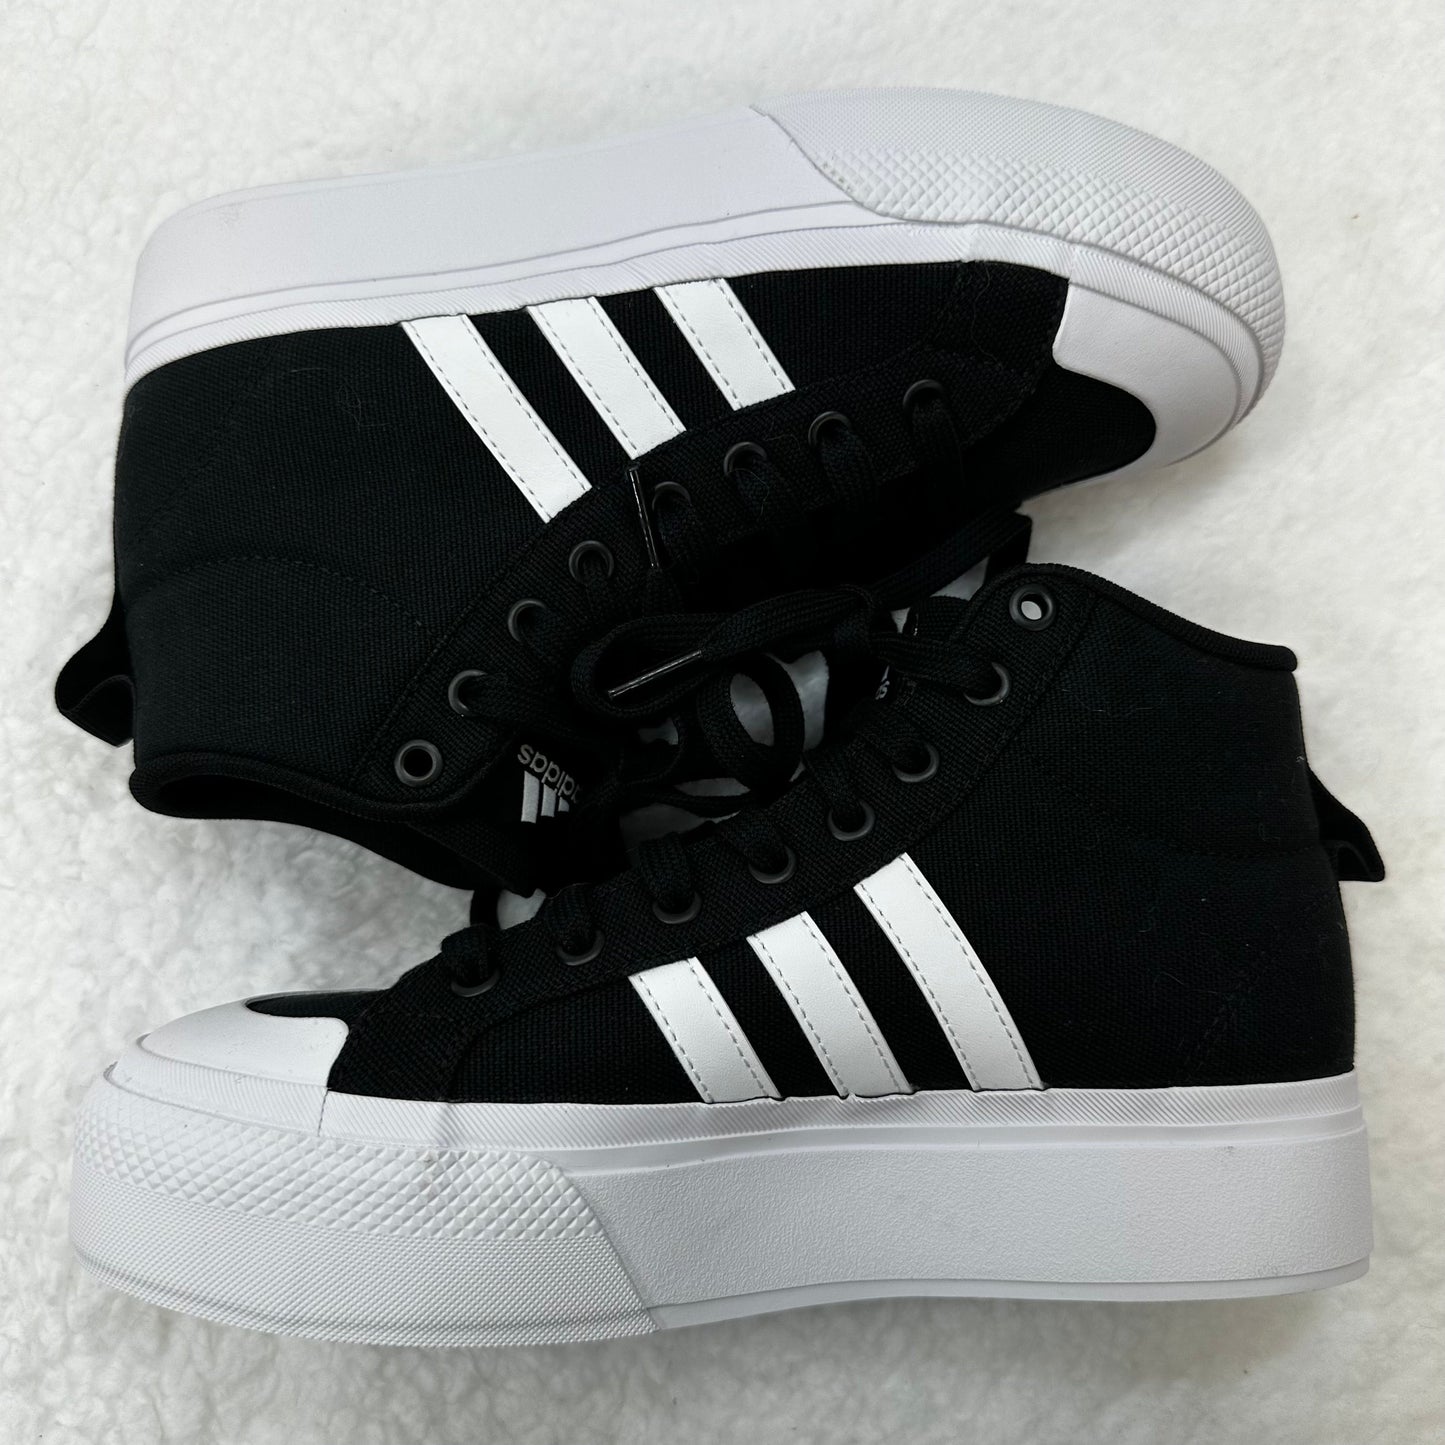 Black Shoes Sneakers Adidas, Size 6.5